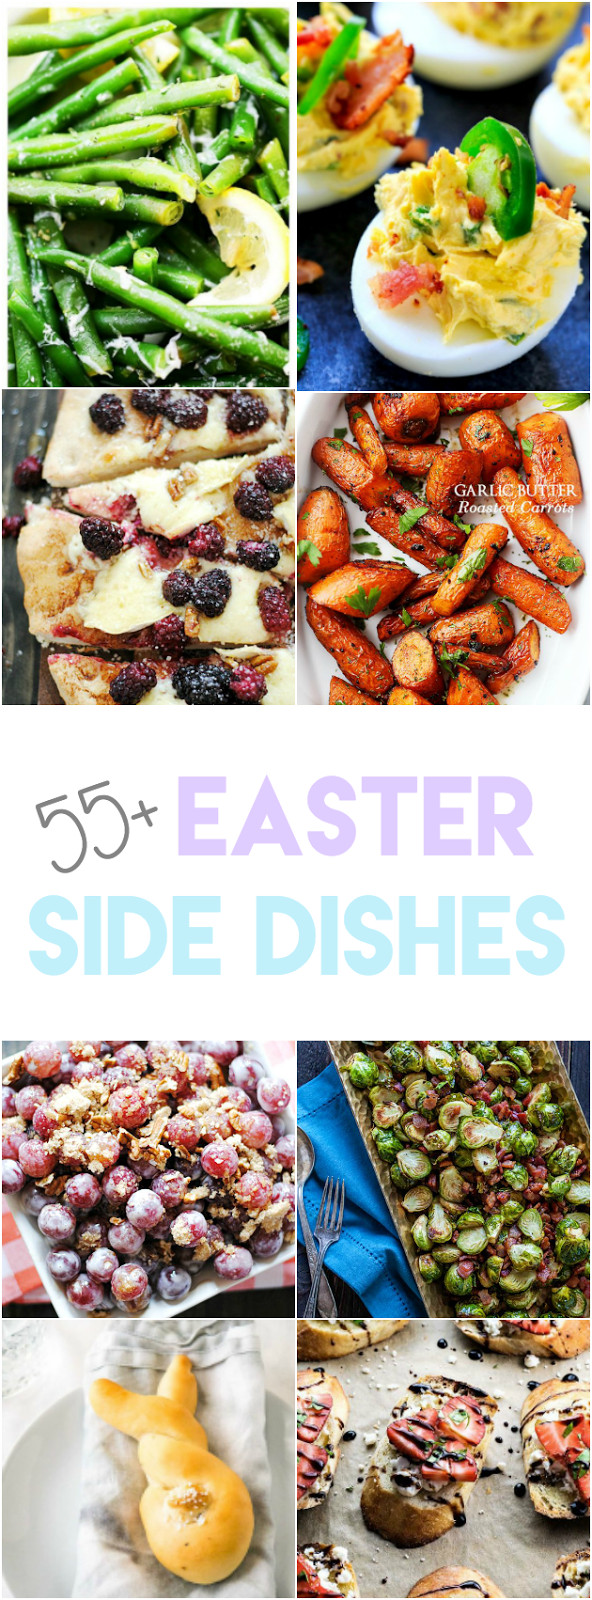 Easter Side Dishes Pinterest
 55 Easter Side Dishes Keat s Eats